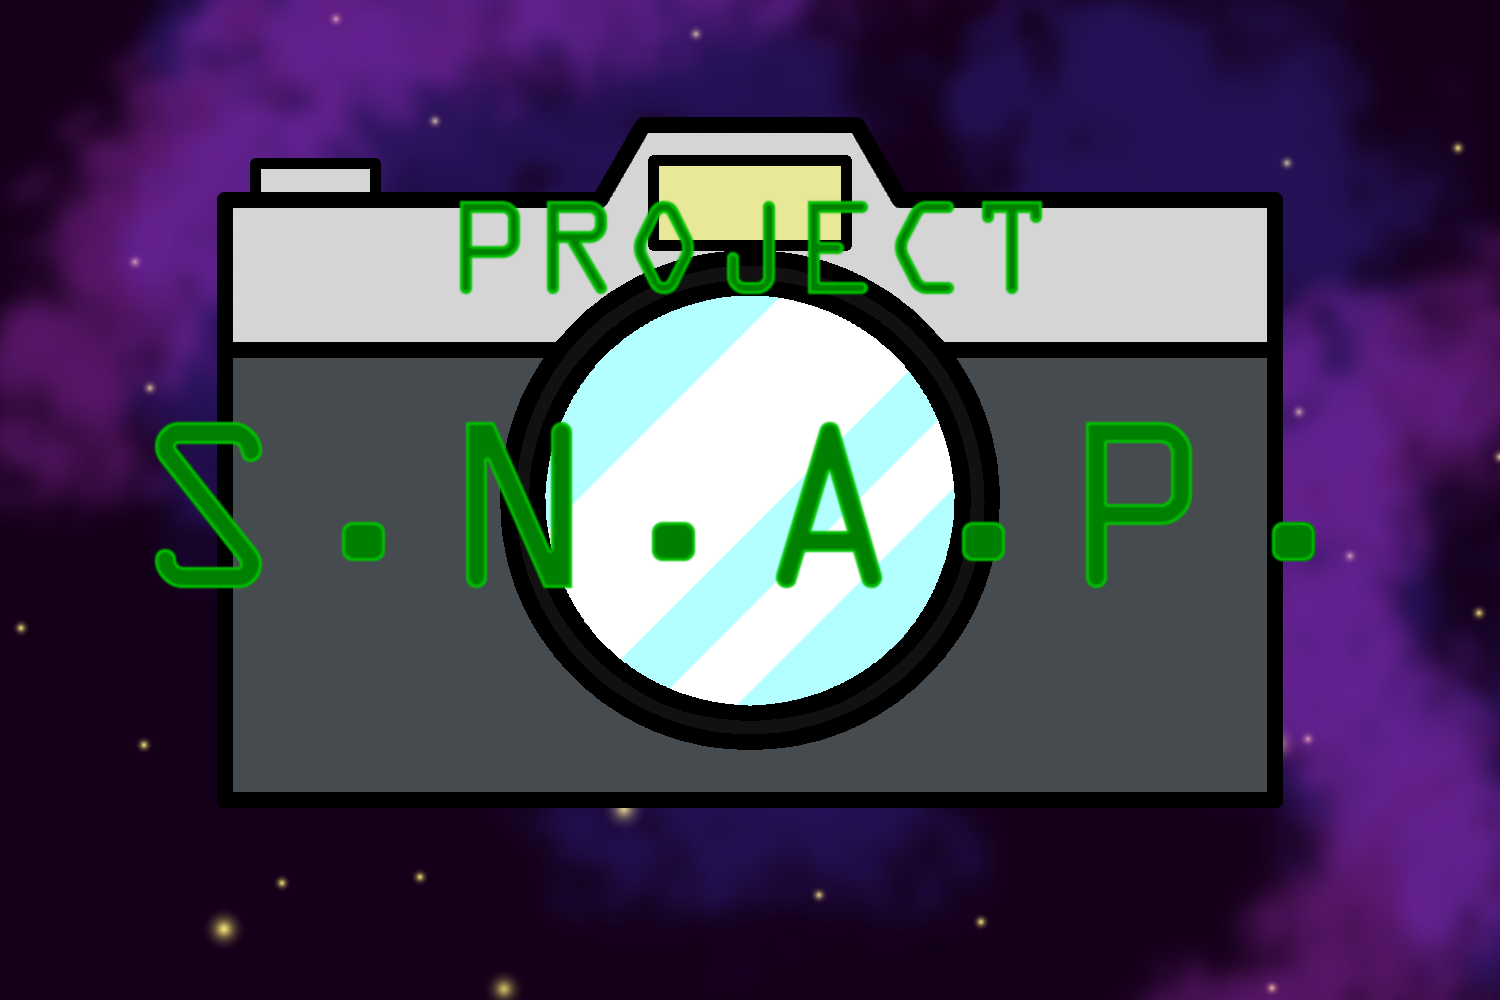 Project S.N.A.P. : Space-Nature Archival Program